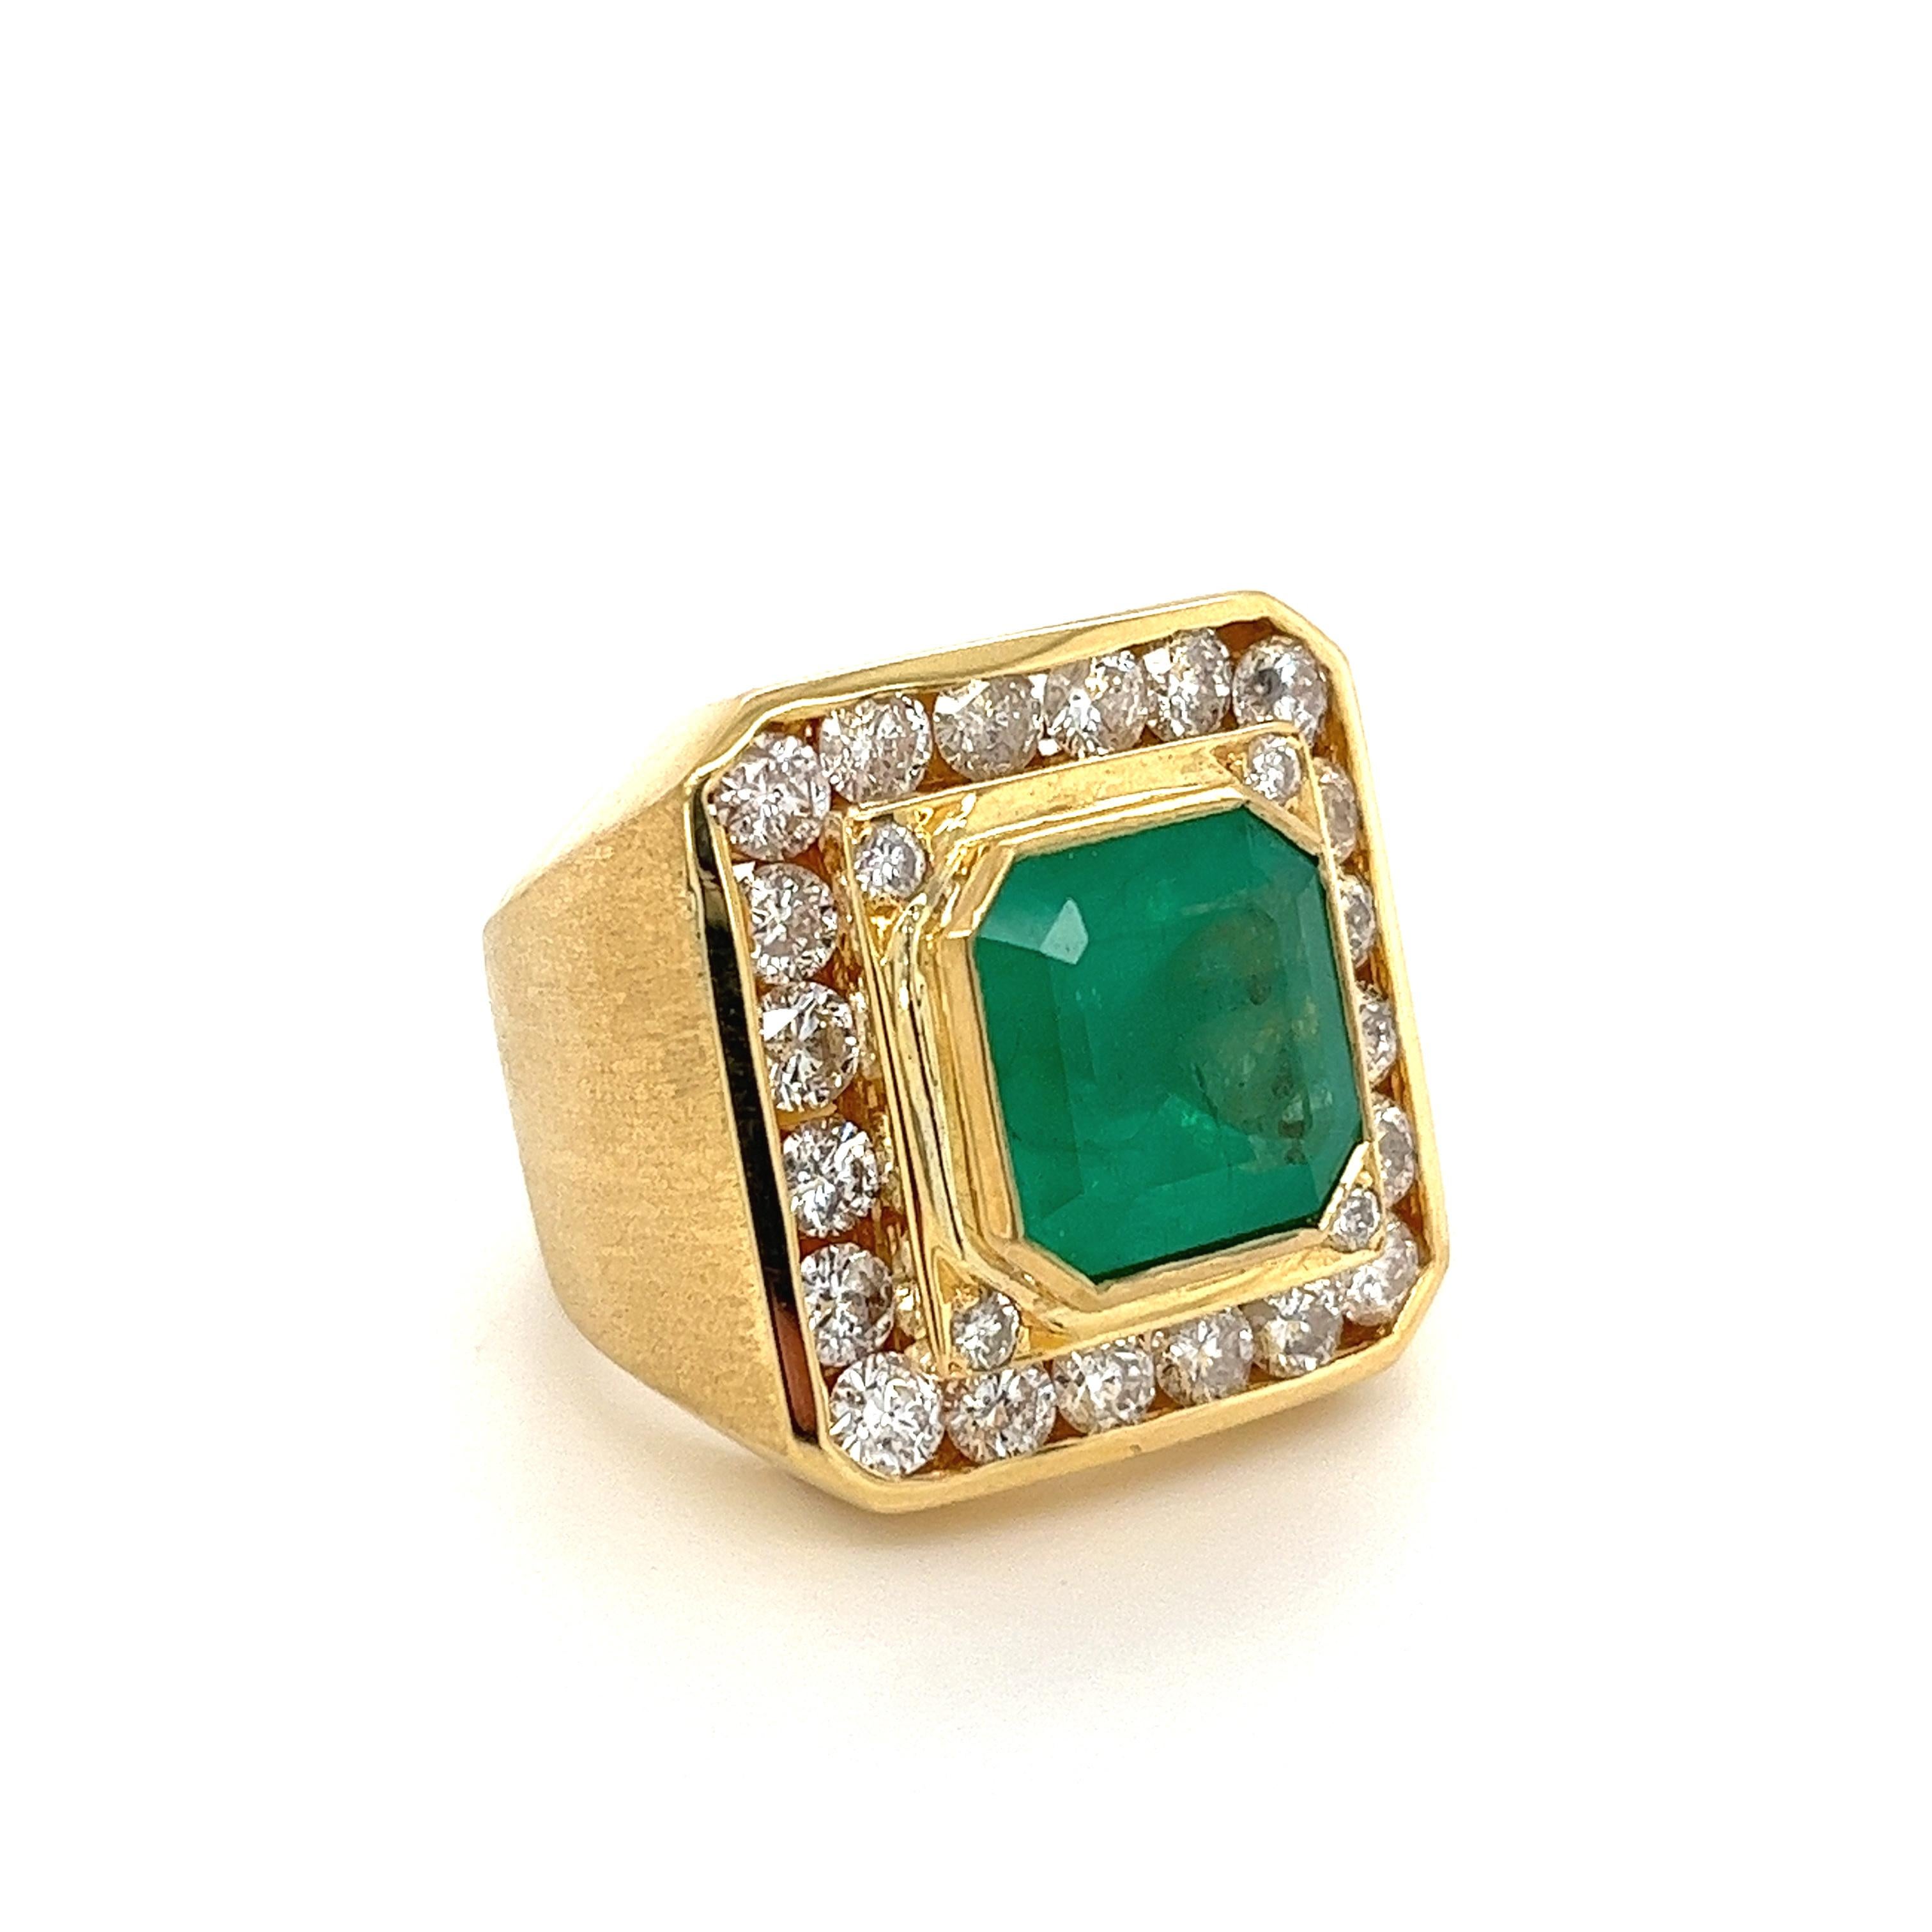 Art Deco 5 Carat Colombian Emerald Mens Ring with Round Diamond Halo in 18k Yellow Gold